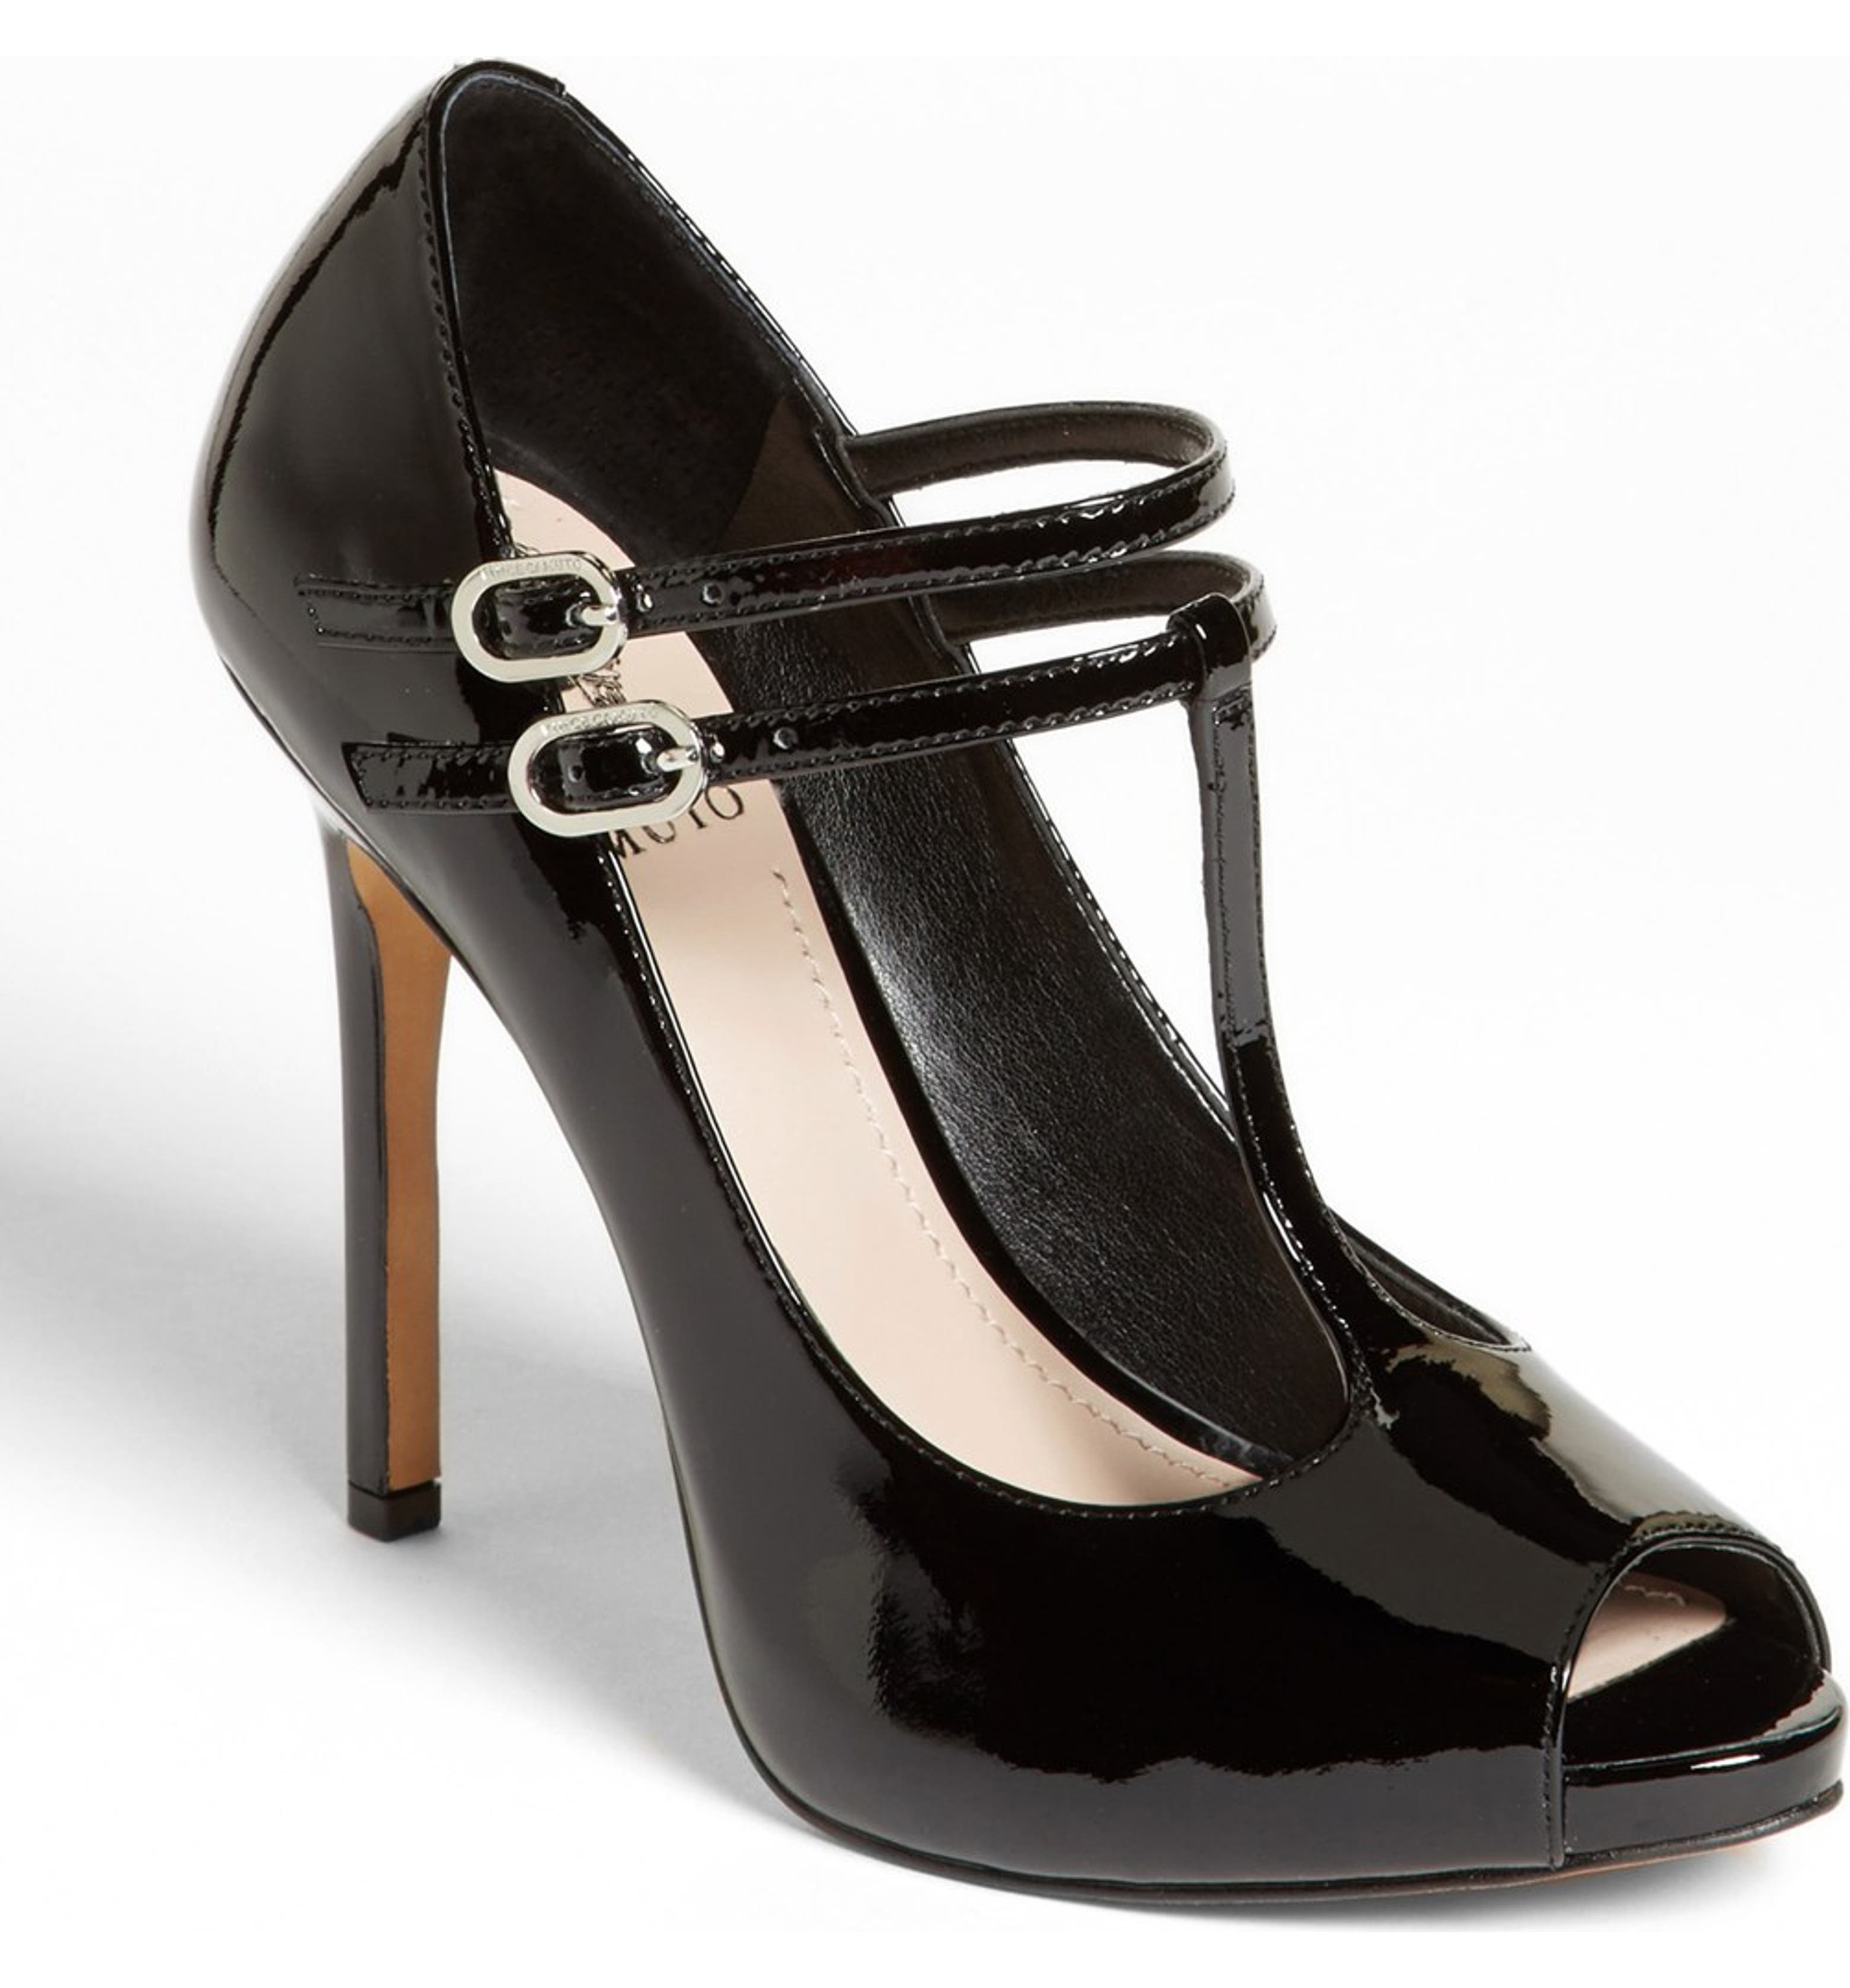 Vince Camuto 'Carlii' Patent Leather Peep Toe Pump | Nordstrom